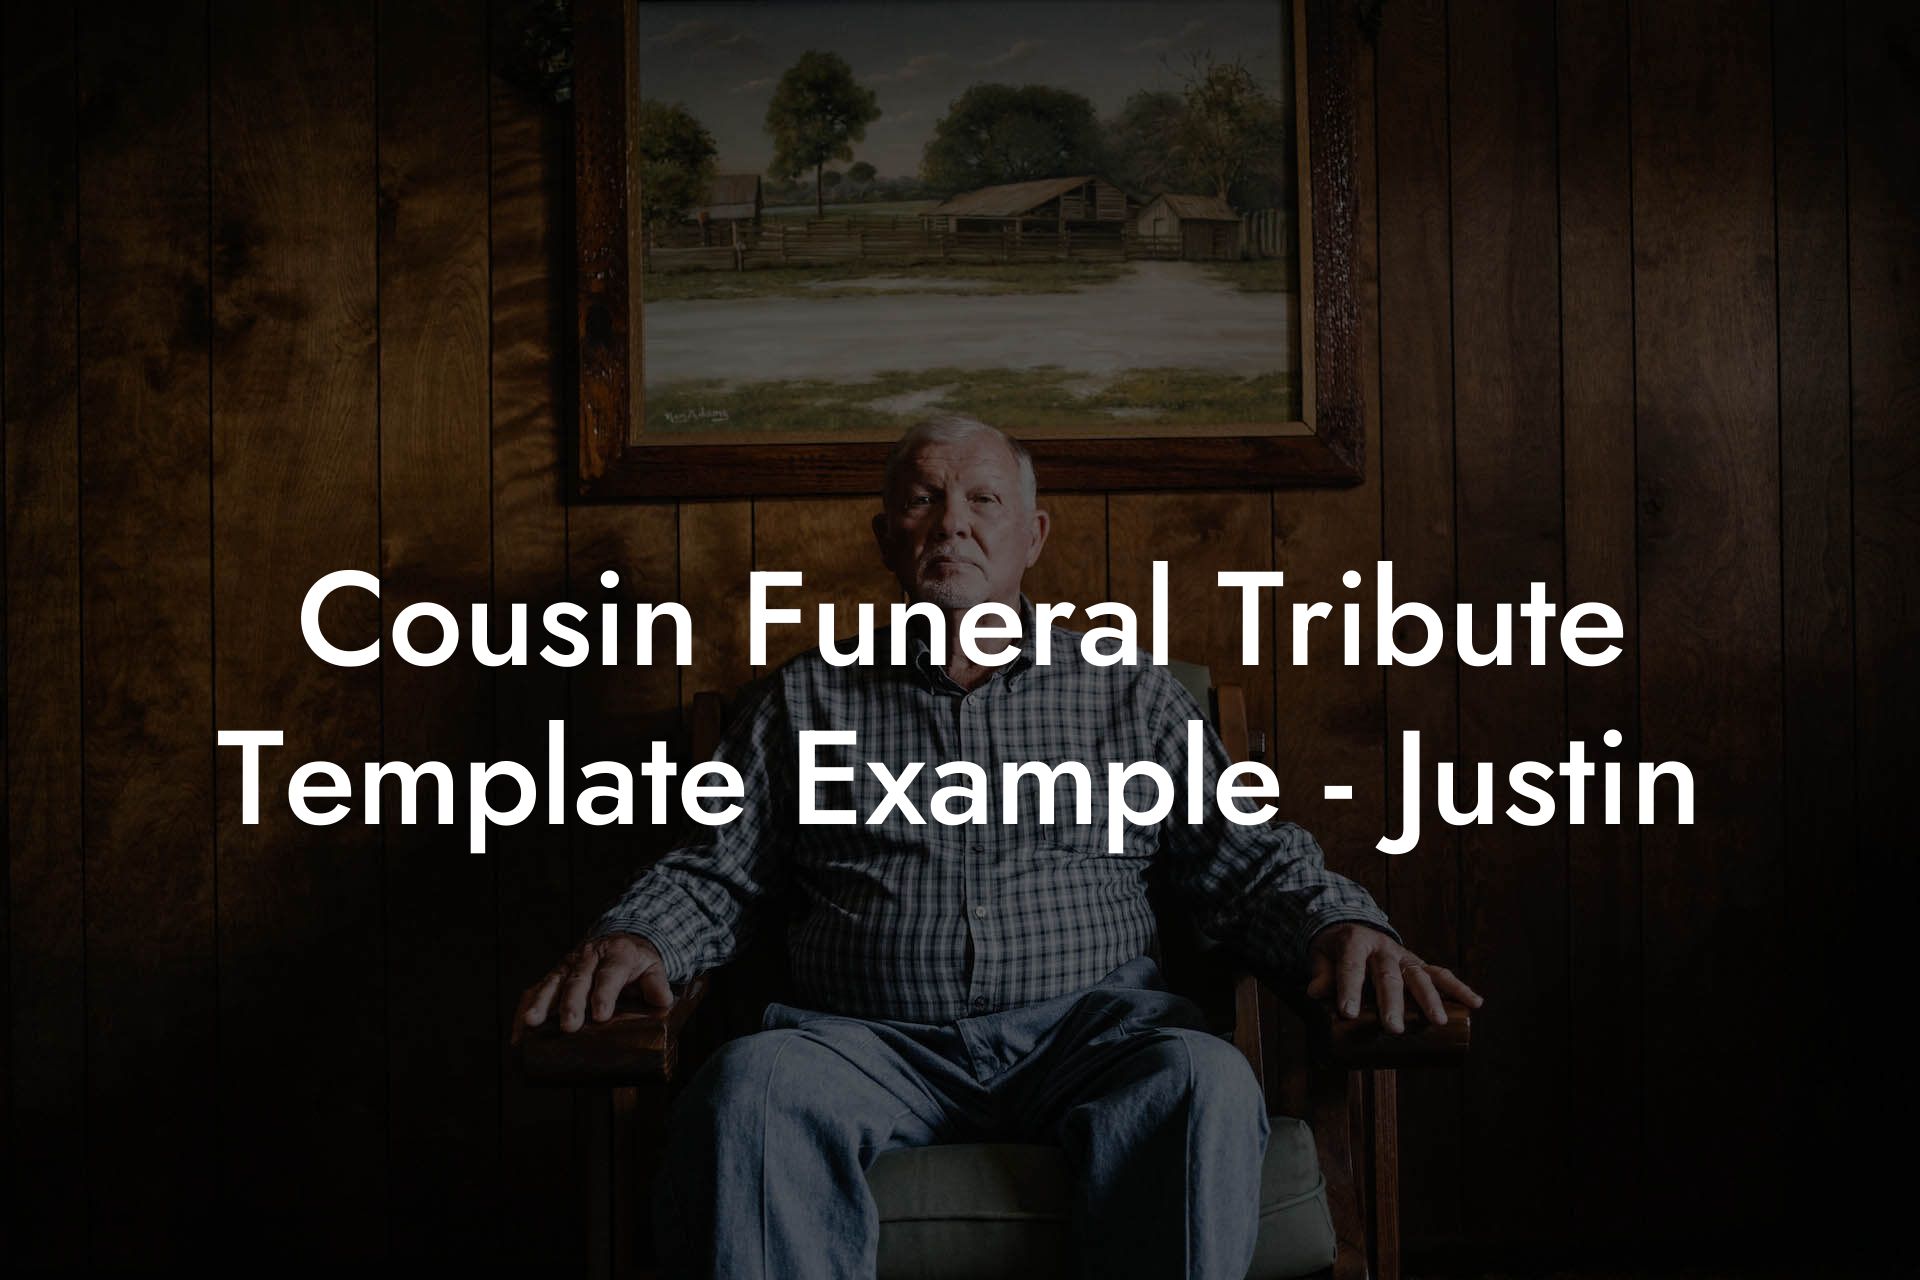 Cousin Funeral Tribute Template Example - Justin